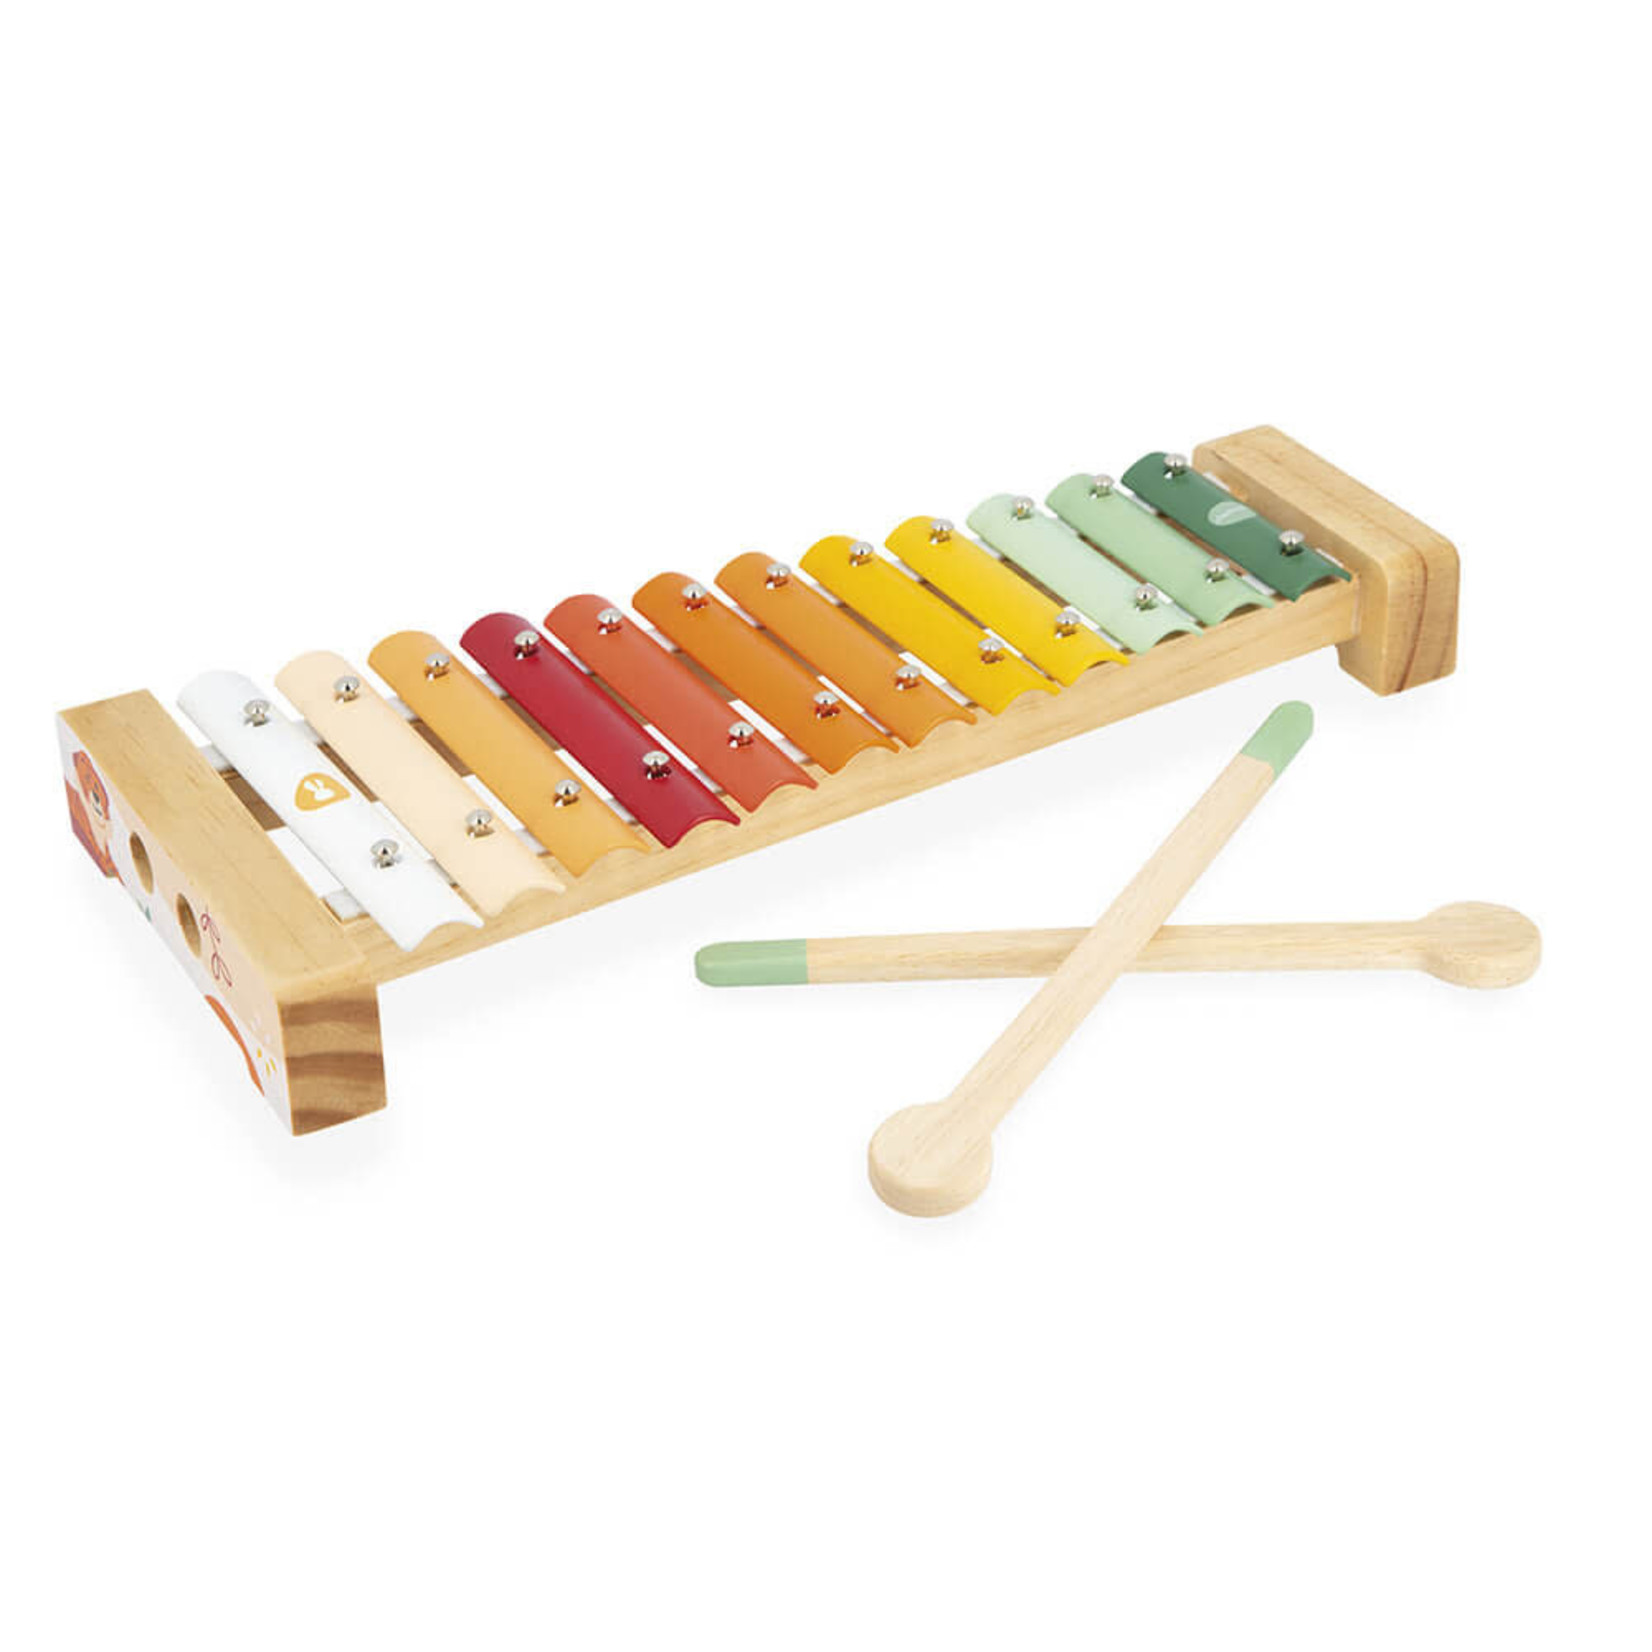 Janod JANOD -Wooden Xylophone with Multicolored Metal Bars 'Metal Xylo'